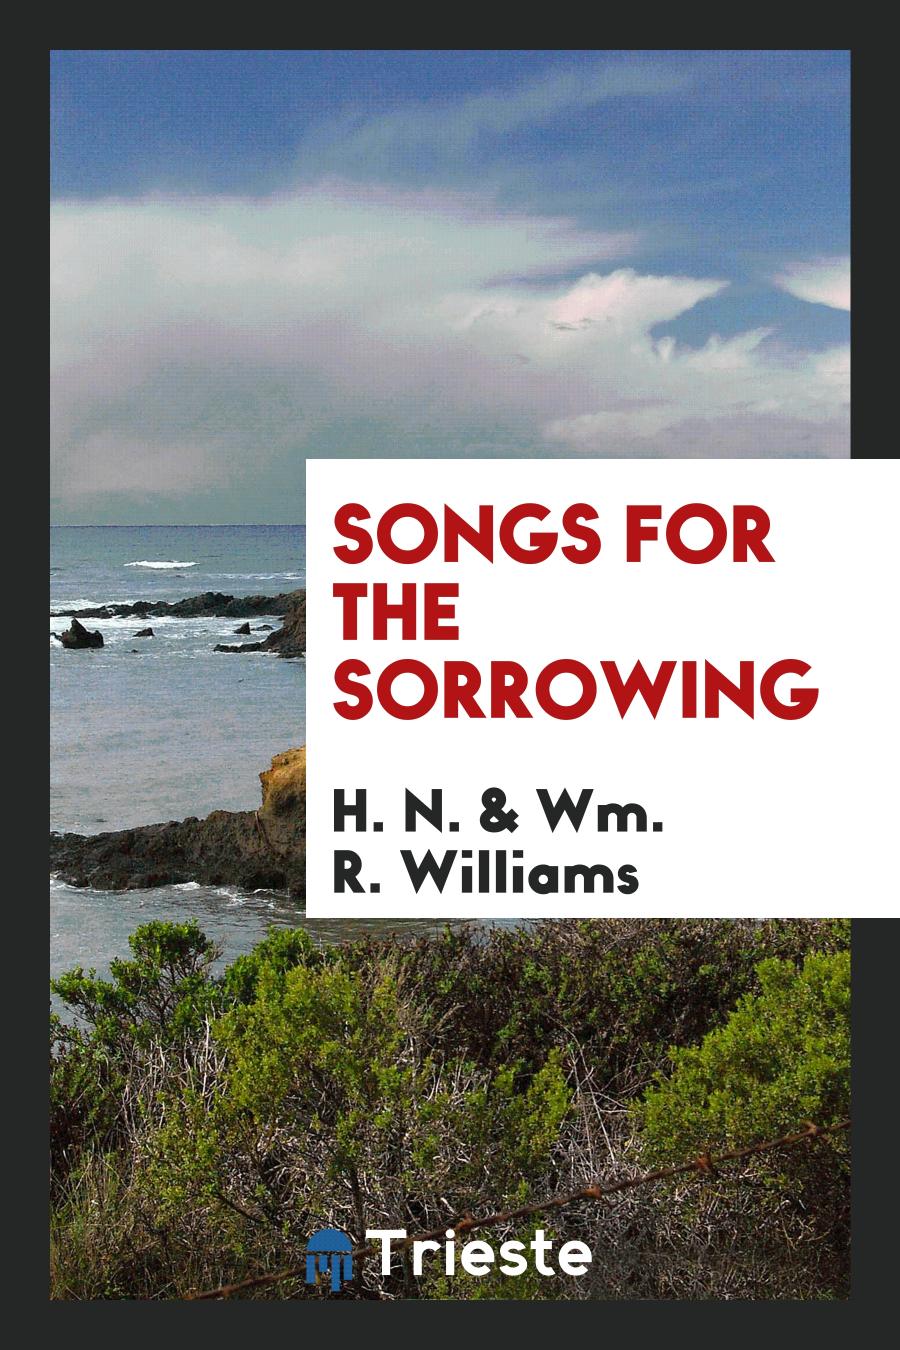 Songs for the sorrowing